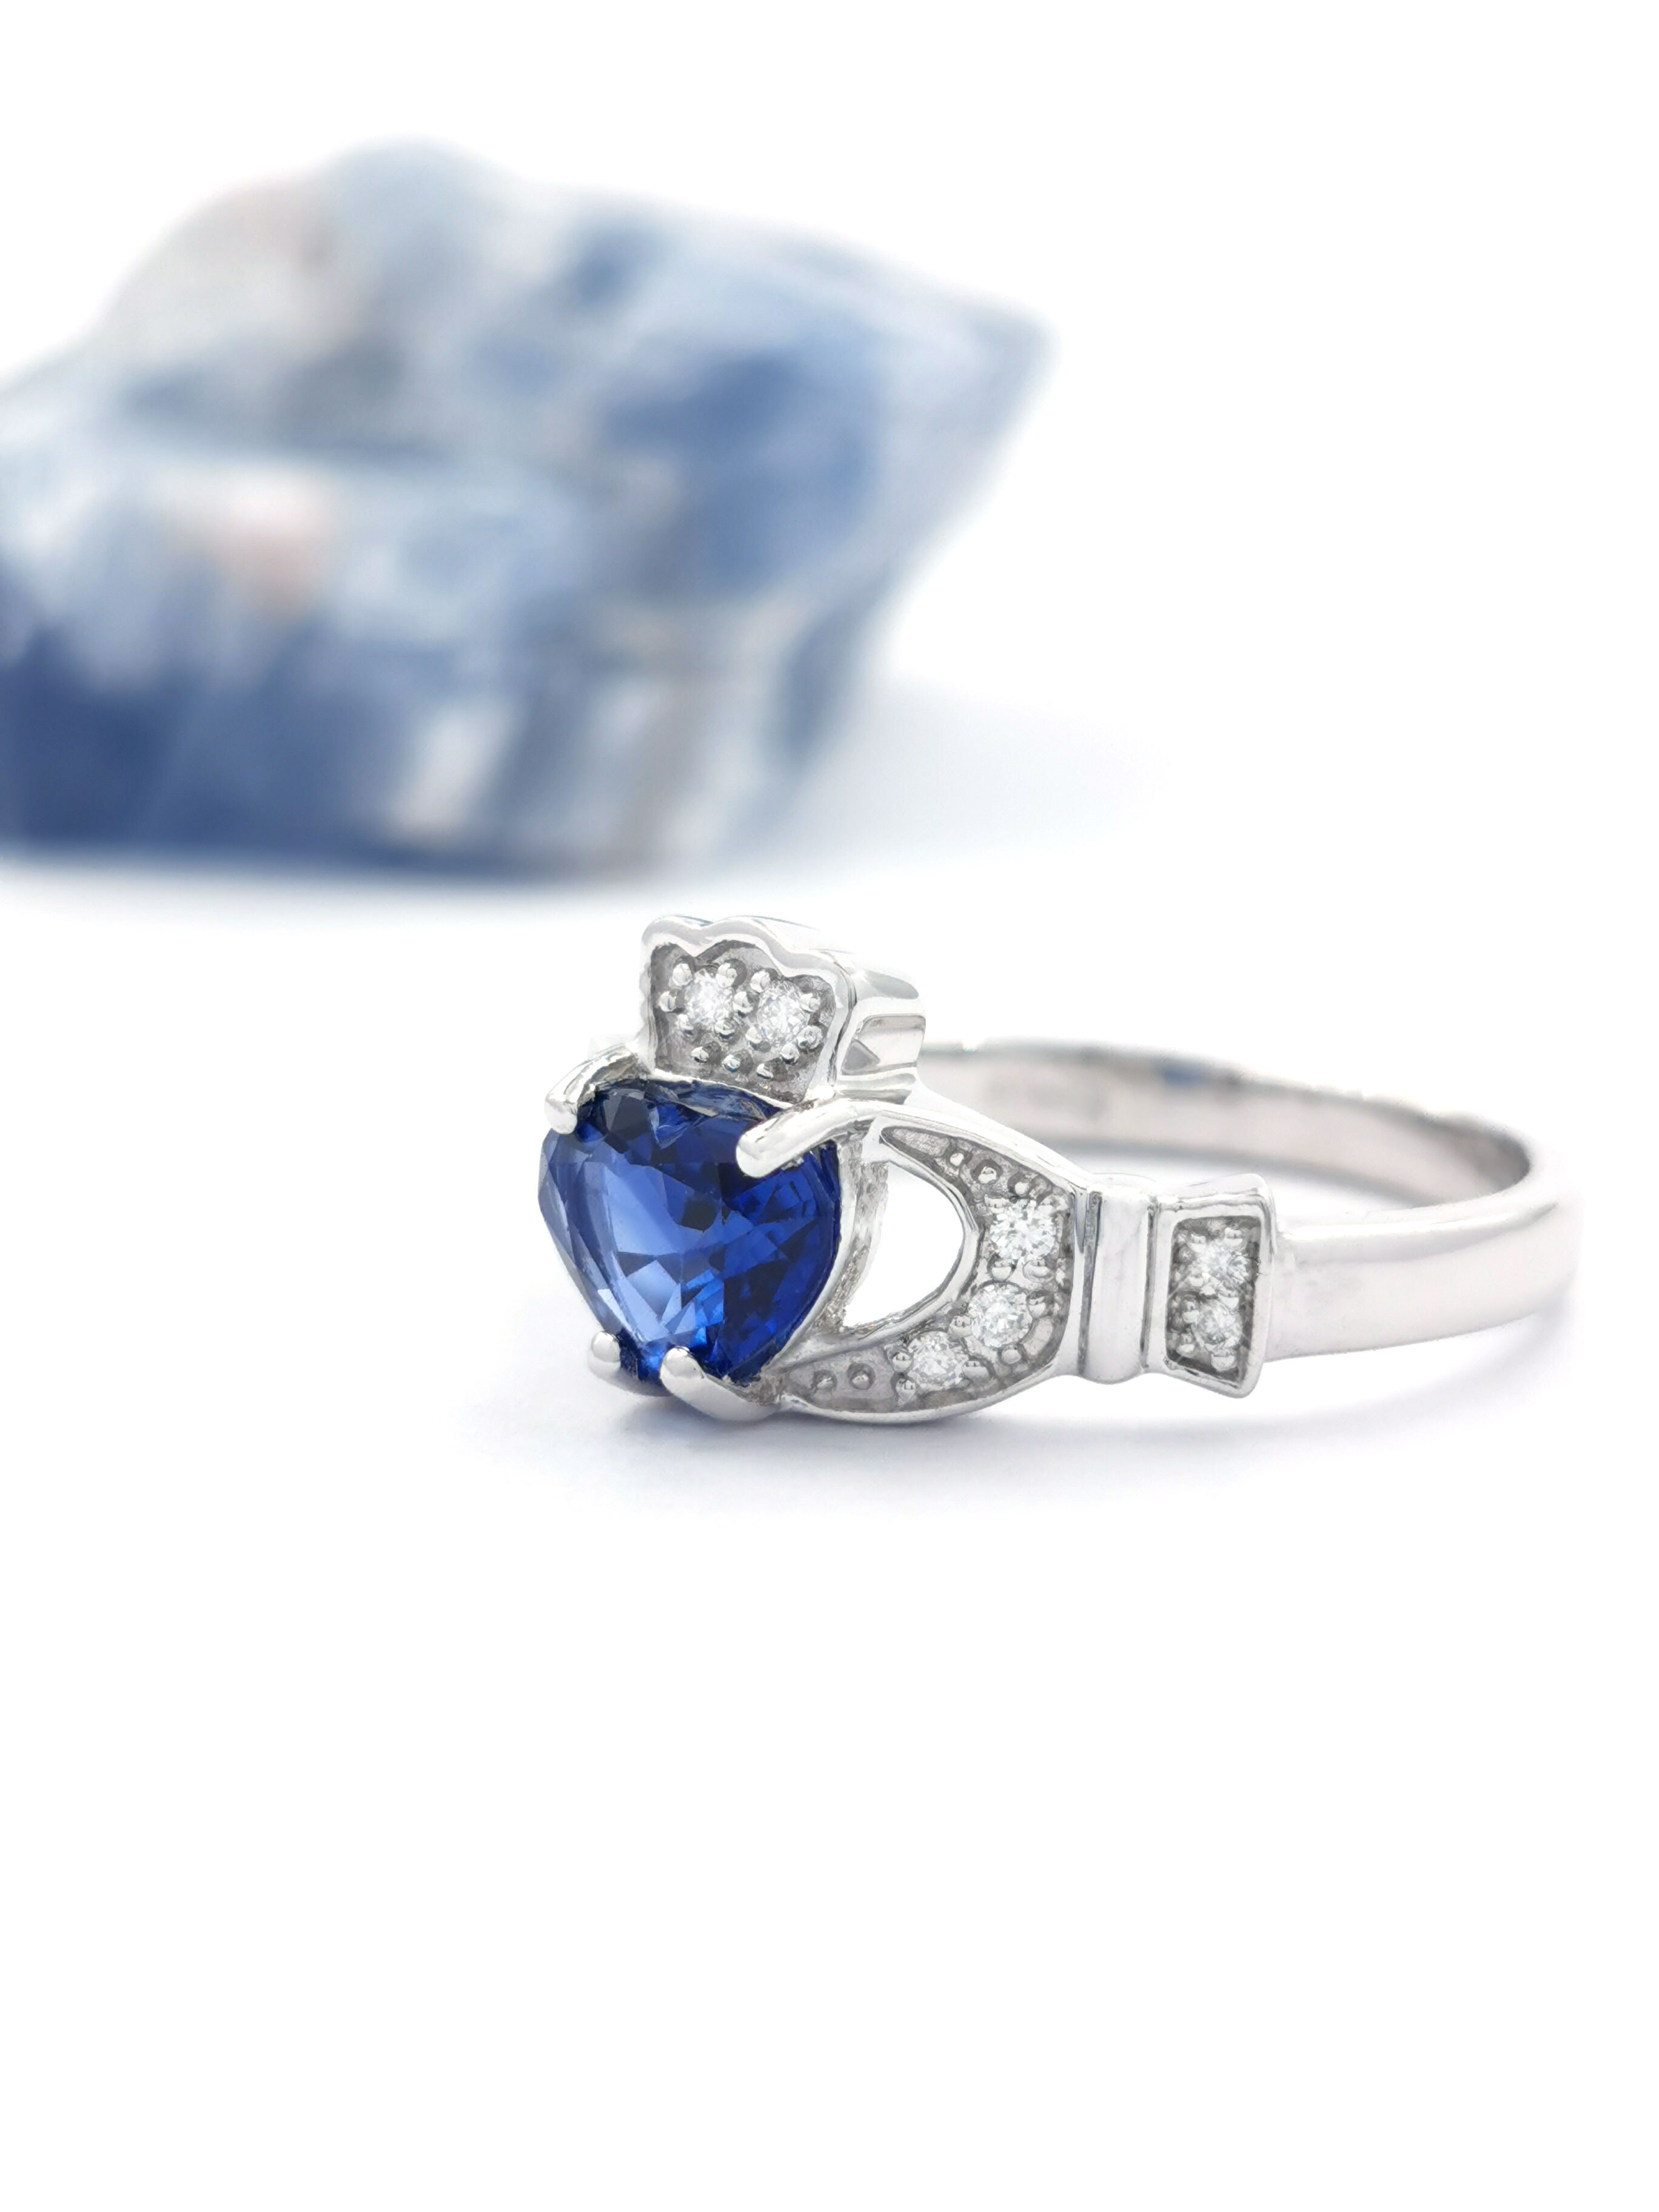 14K White Gold Claddagh Engagement and Wedding Ring Set, Crafted With  Heart-Shape Sapphire And Diamonds